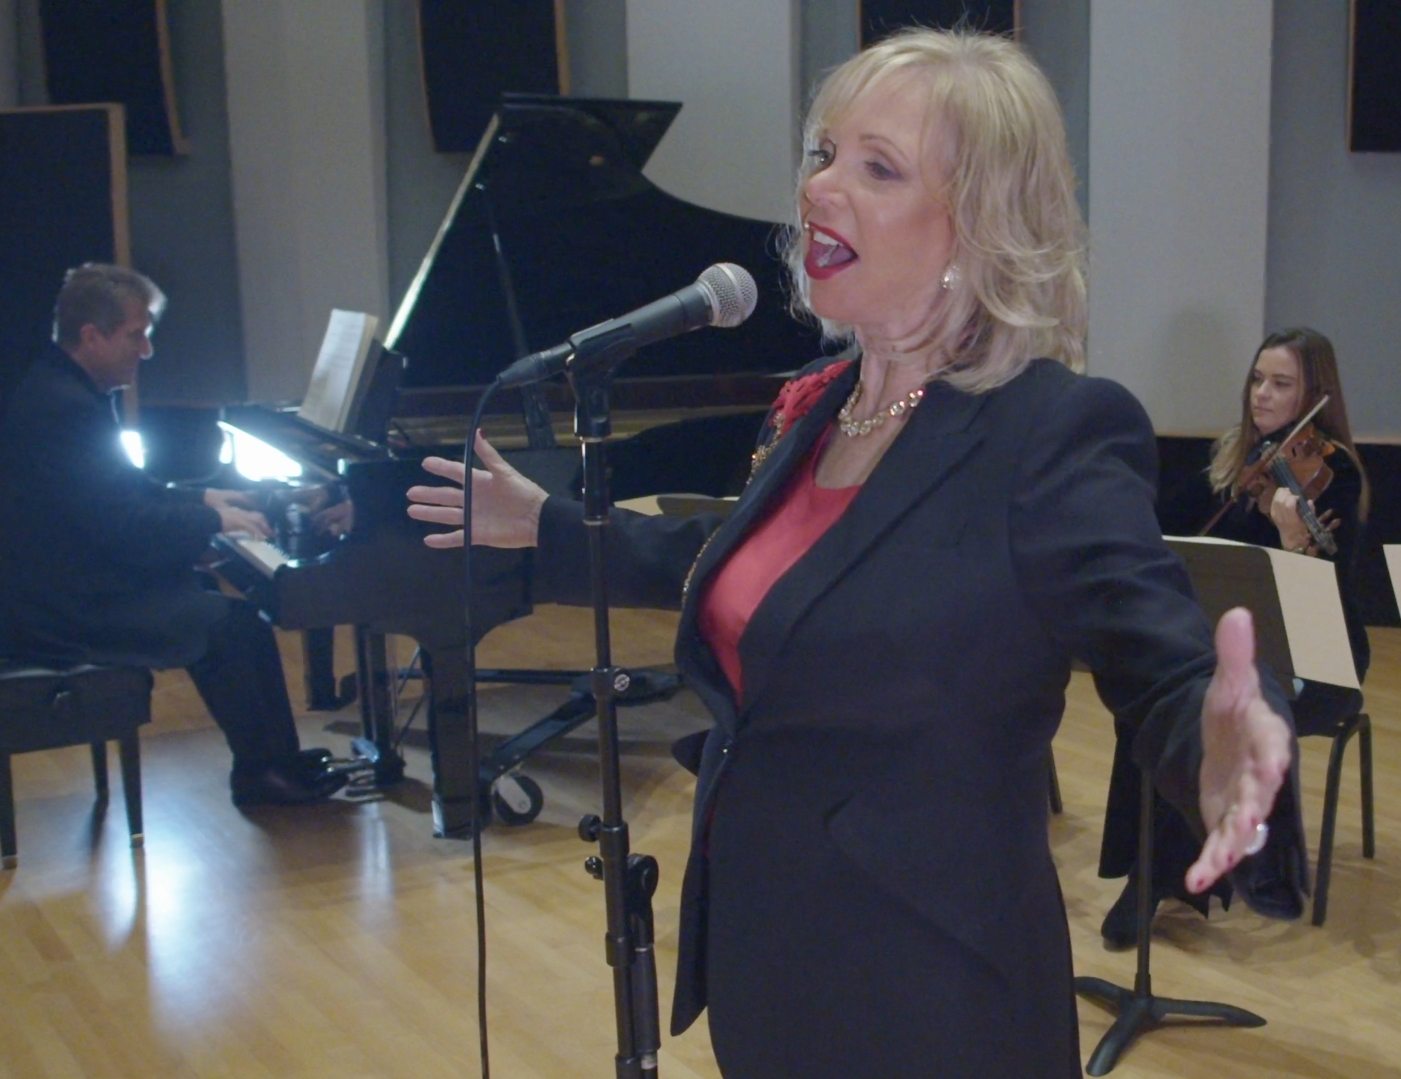 Watch Judy Whitmore’s Dazzling Take On Frank Sinatra’s “The Best Is Yet To Come” on the Grammy YouTube Channel